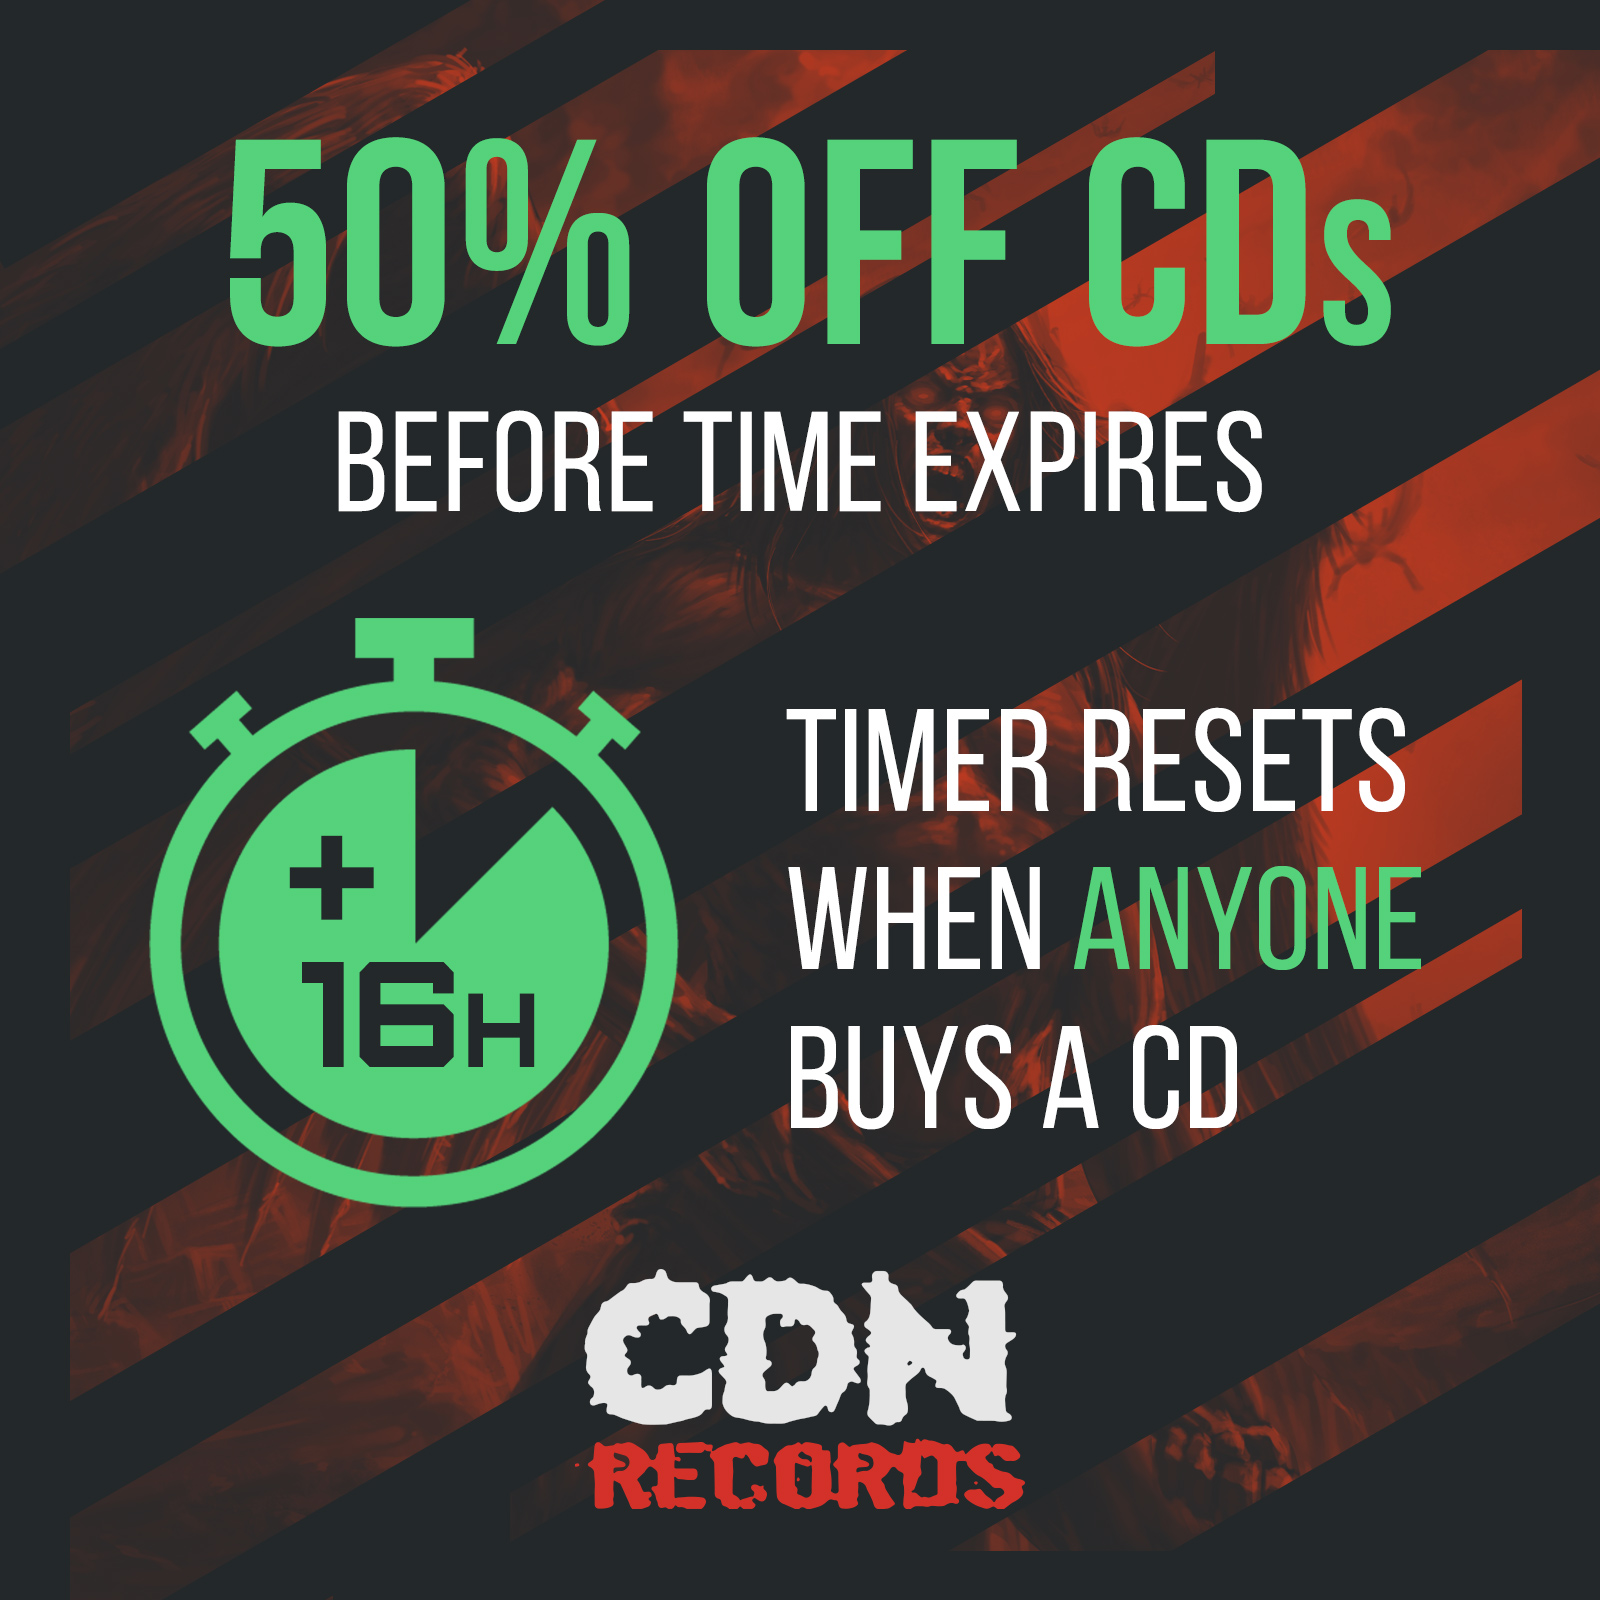 Graphic for 50% off CDs timer